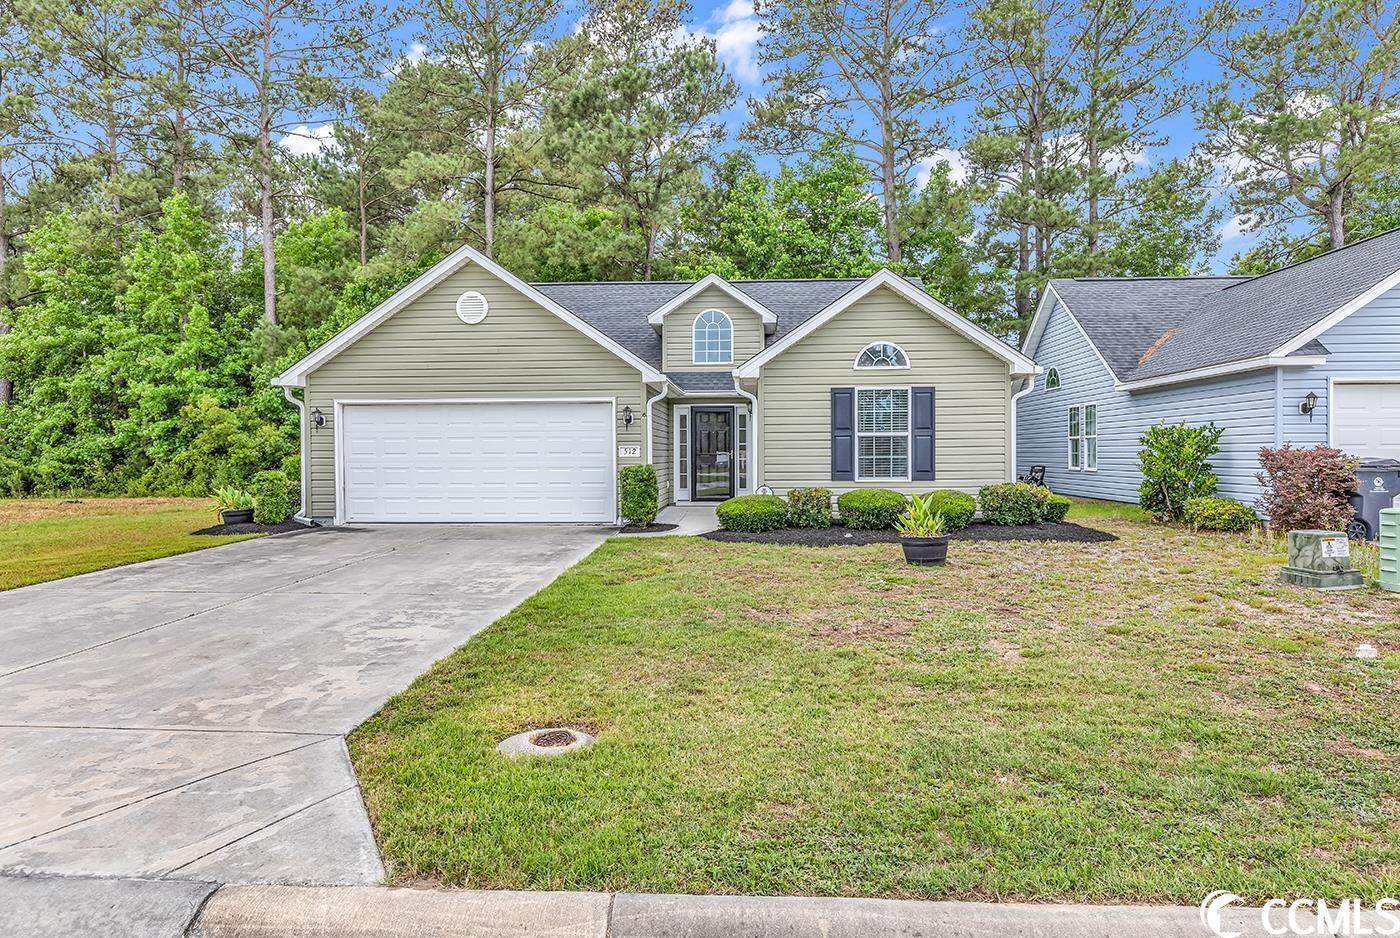 512 Easter Ct. Myrtle Beach, SC 29588